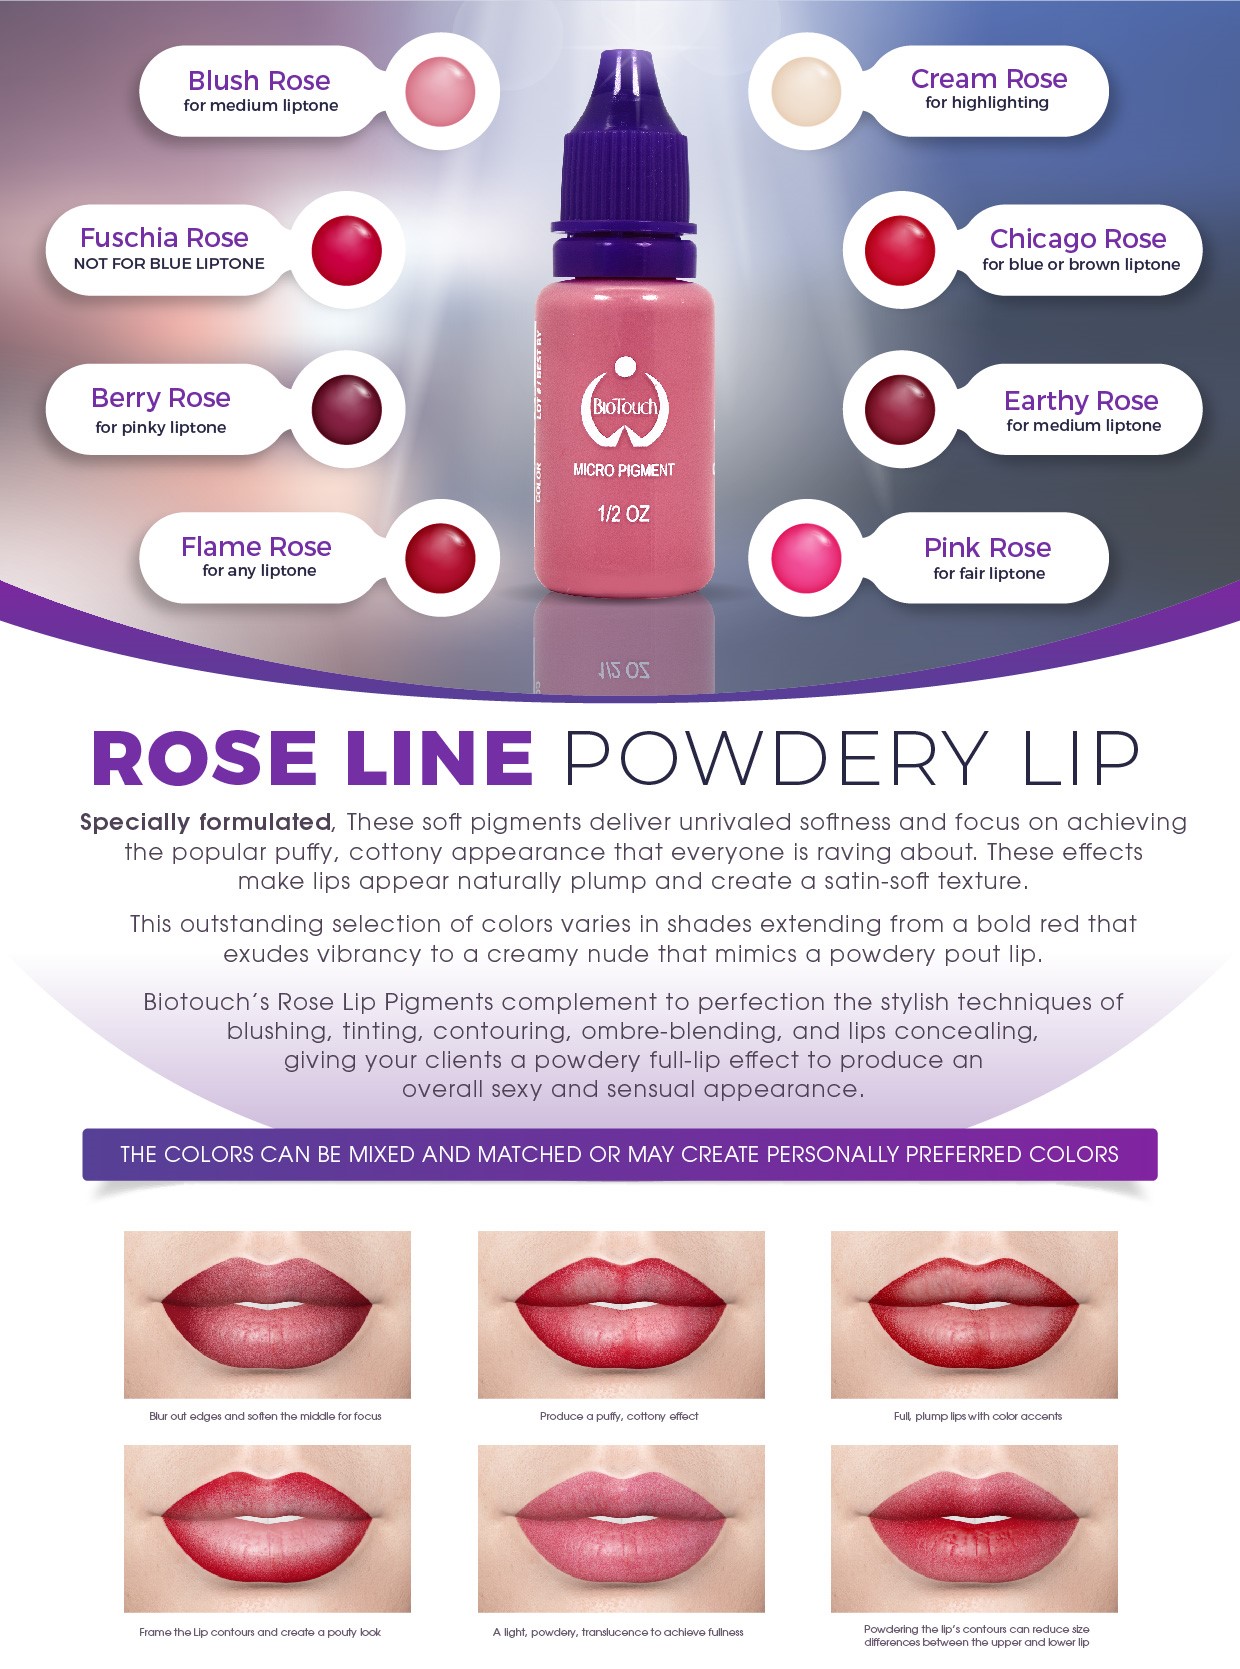 Biotouch ROSE_LINE_FLYER_POWDERY_LIP